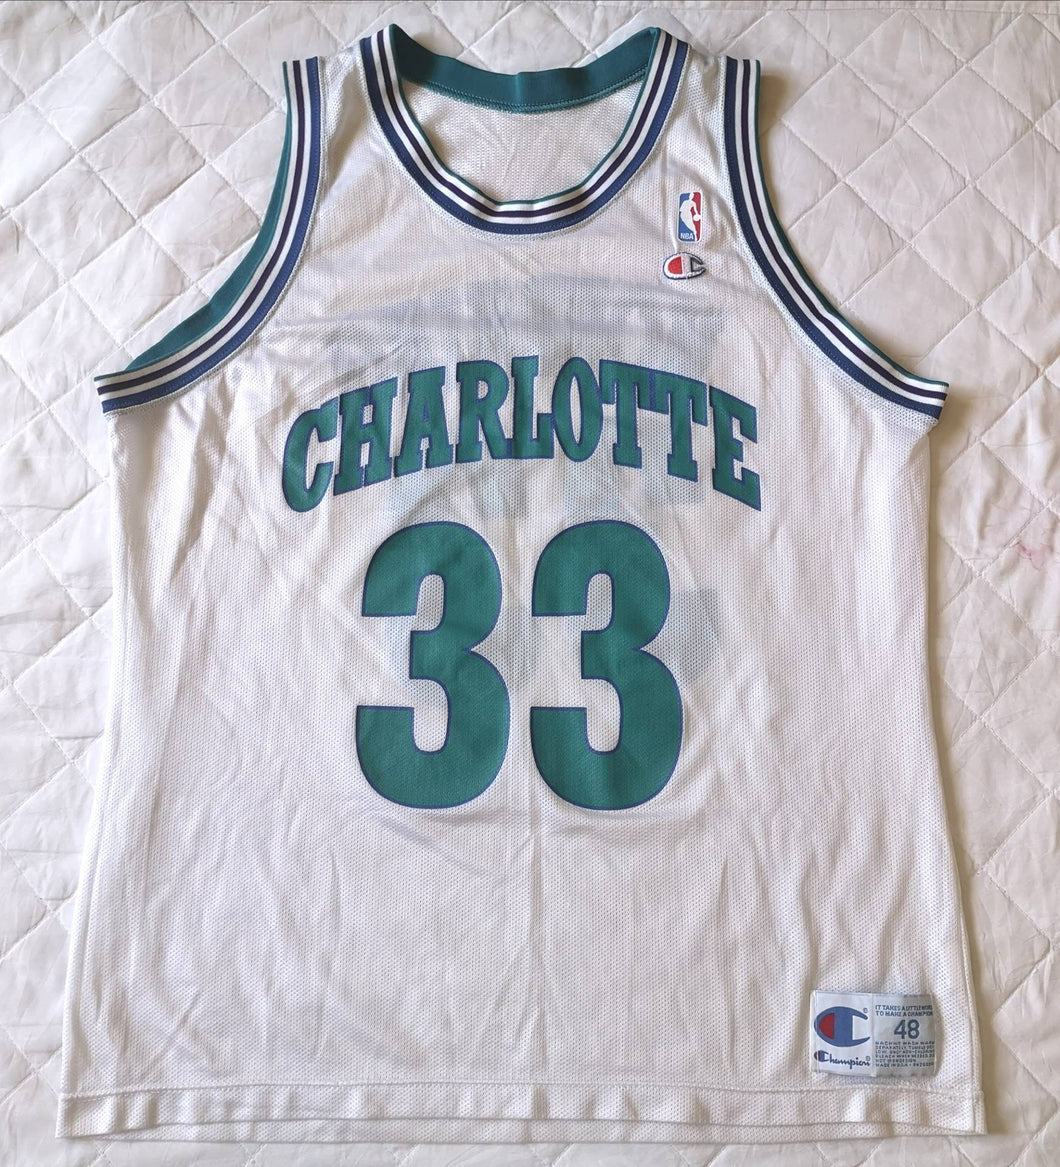 Rarely Jersey Alonzo Mourning #33 Charlotte Hornets 1992-93 NBA Champion Vintage Authentic